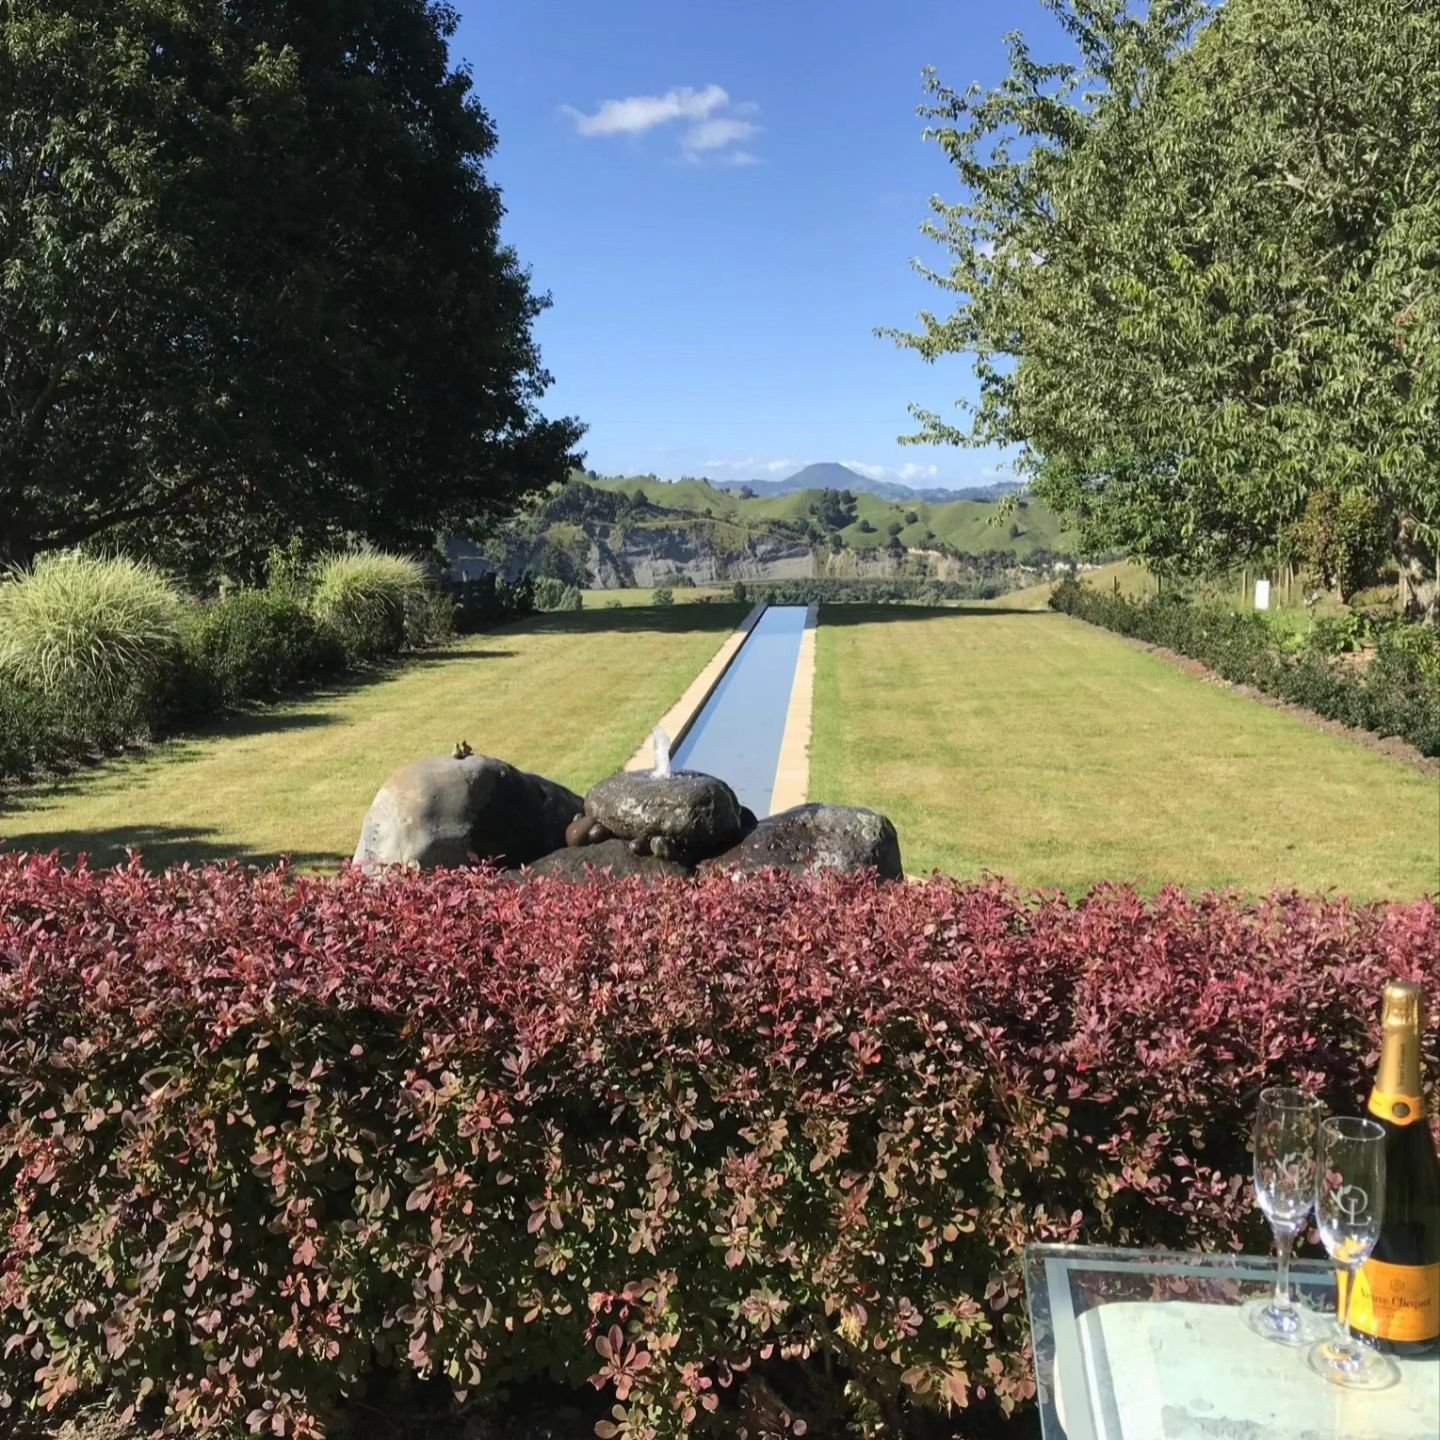 Omaka Lodge ⭐⭐⭐⭐⭐

@omaka.lodge is only a short drive from Taumarunui, along the Forgotten World Highway and scenic drive following the Whanganui River. The large country home was built in 1977-78 and designed by renowned New Zealand architect, Jack 